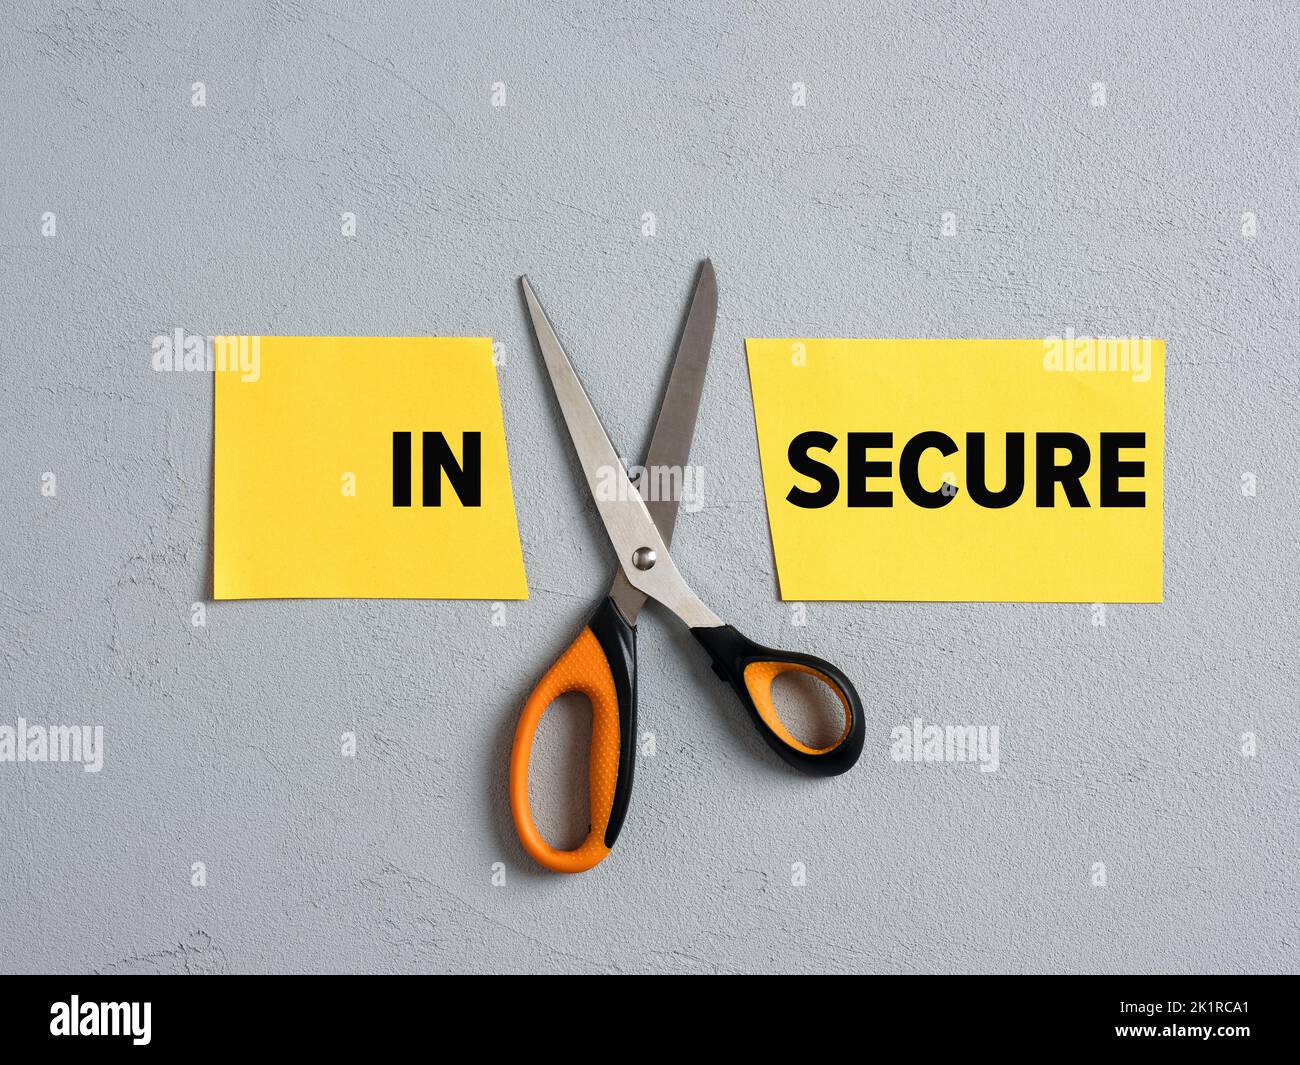 Scissors Cutting off the word insecure and transforming into secure. Security, insurance, confidence, protection and overcoming fears concept. Stock Photo